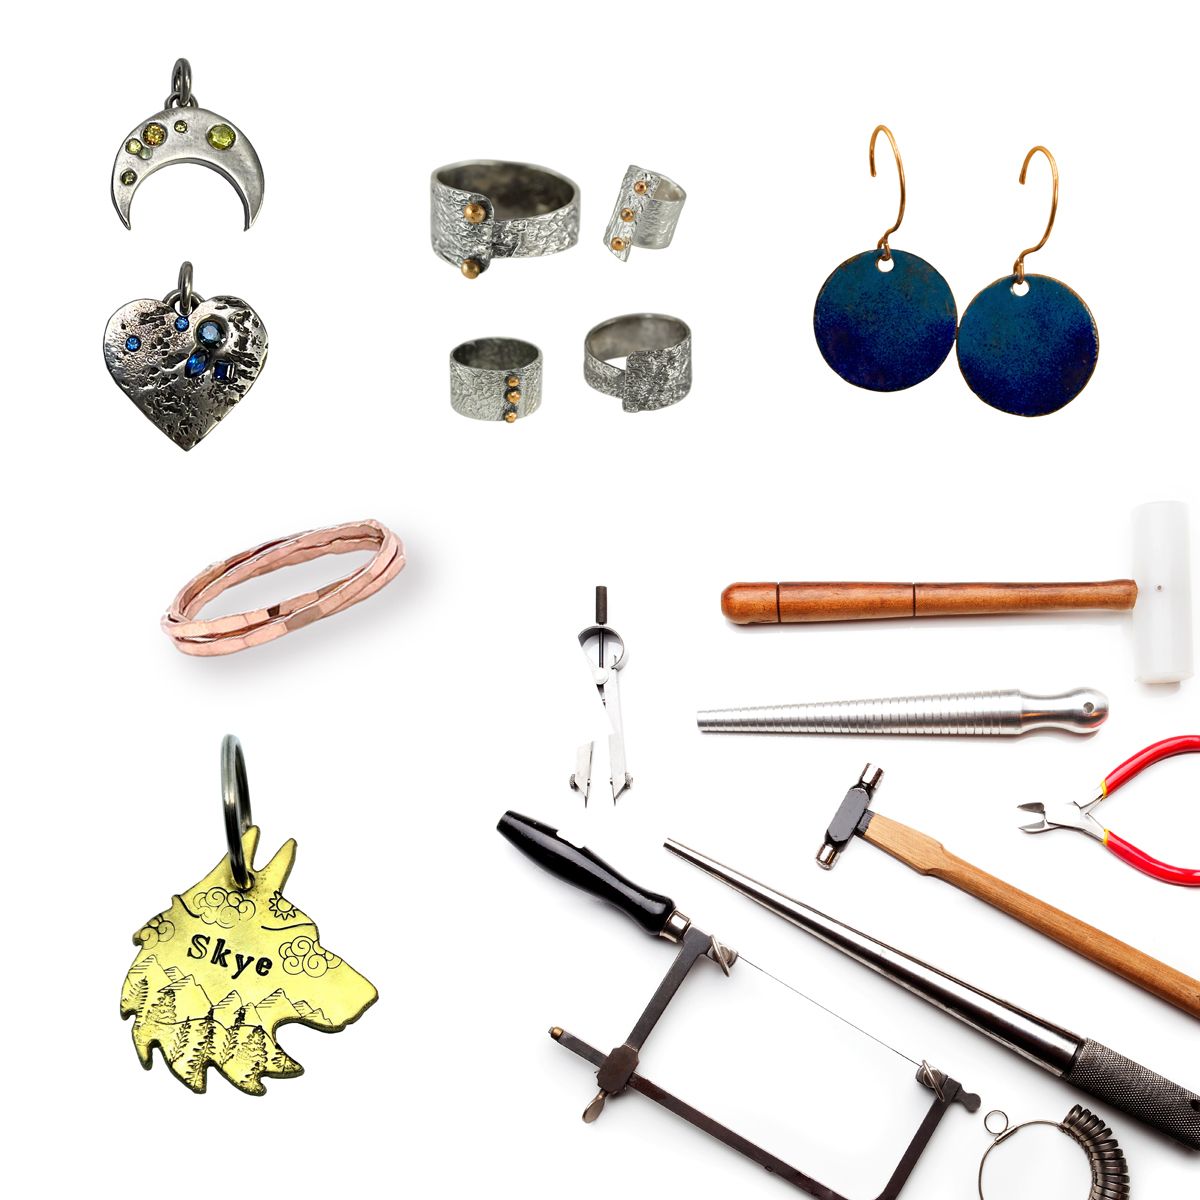 Youth Silversmithing Summer Camp